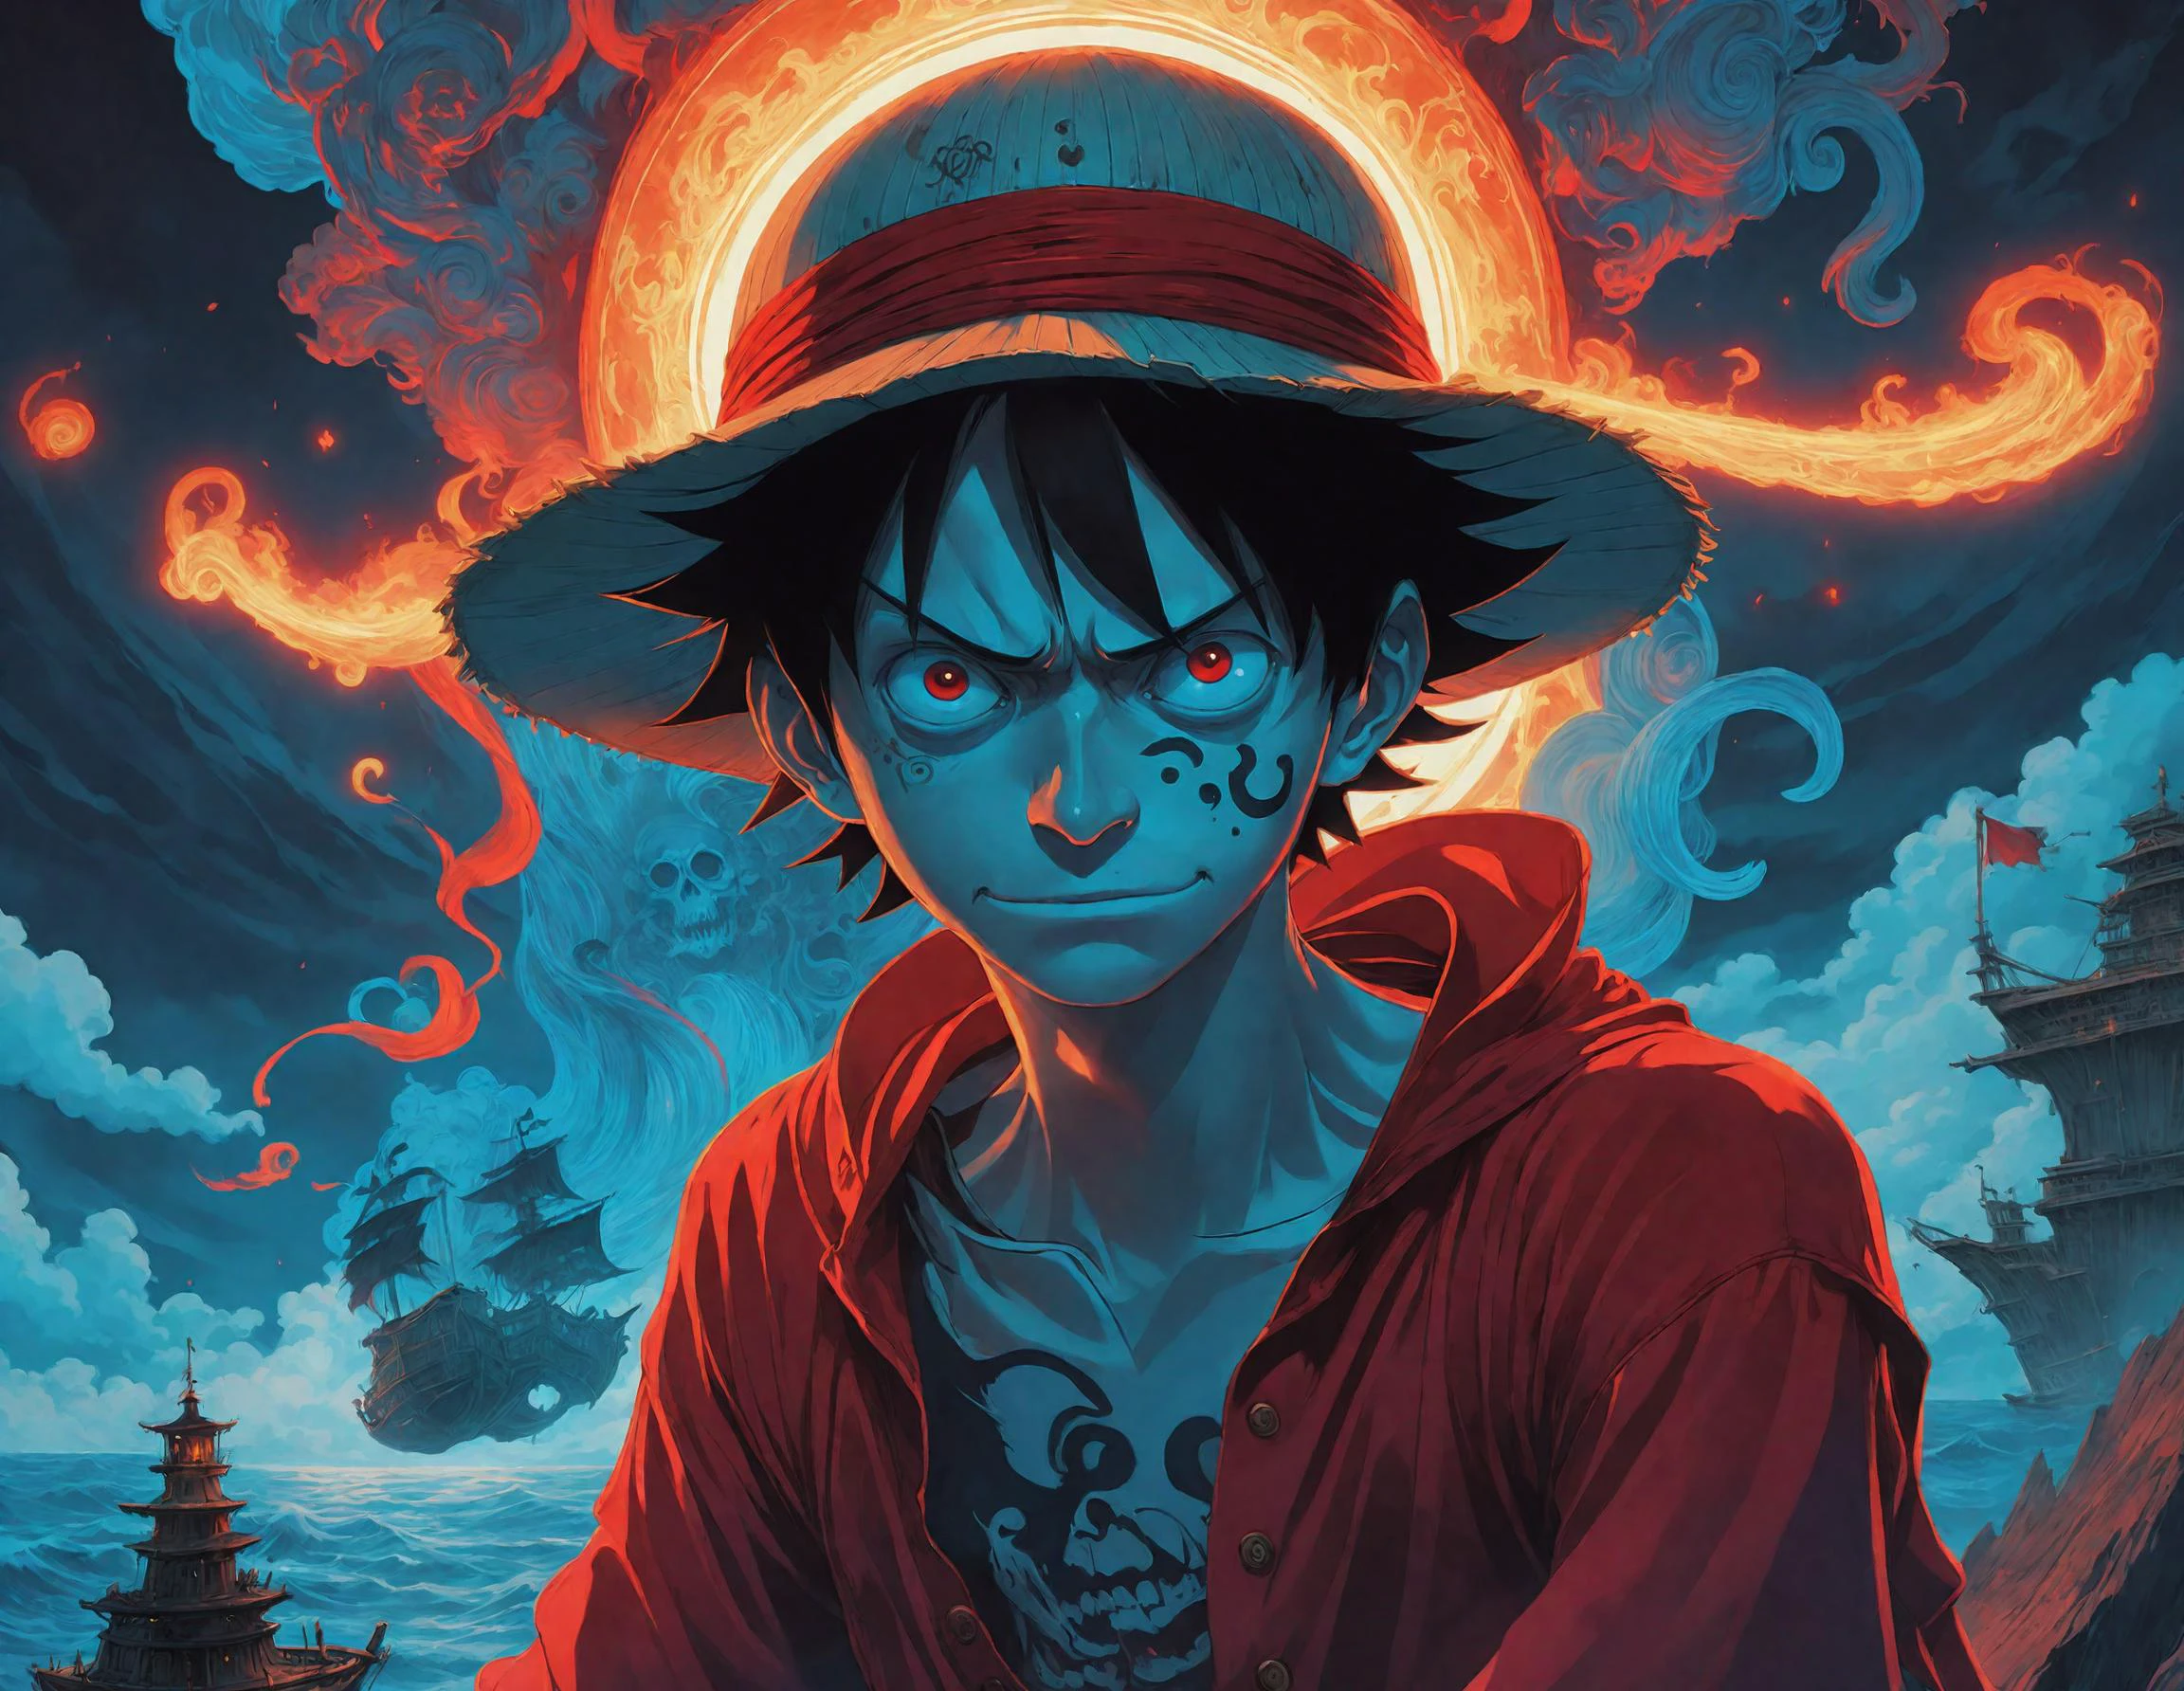 illustration, anime, Monkey D. Luffy, One Piece, vintage, port city, poster, in the style of [james jean], deathcore, [john pitre], detailed atmospheric portraits, oil painting, anime, biopunk, horror art, dark and intricate, unique illustrations, precisionist art, airbrush, mystical landscape, intricate psychedelic, dark azure and red, witchcore